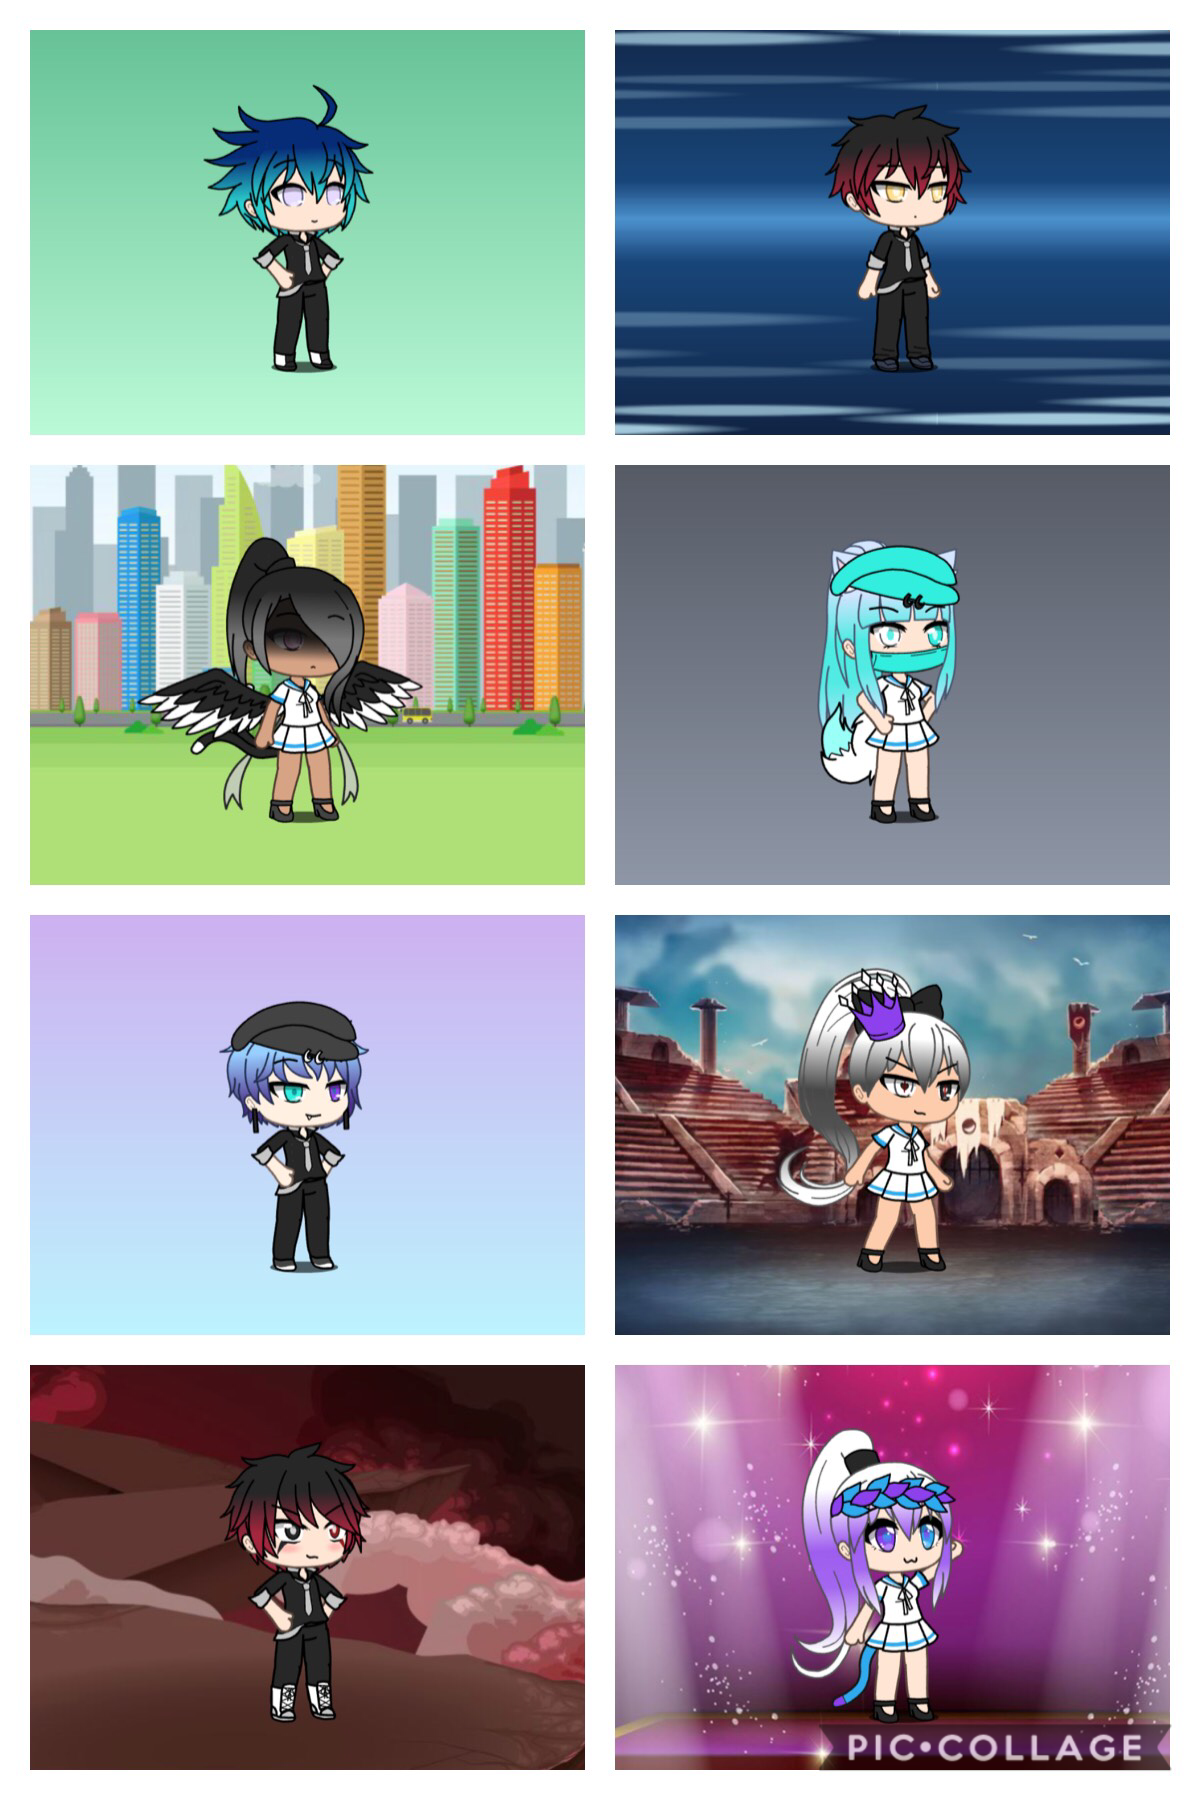 Sooo I’m wanting to be one of those gacha youtubers and these are some characters I’m including in my first one. Got any name suggestions for them?